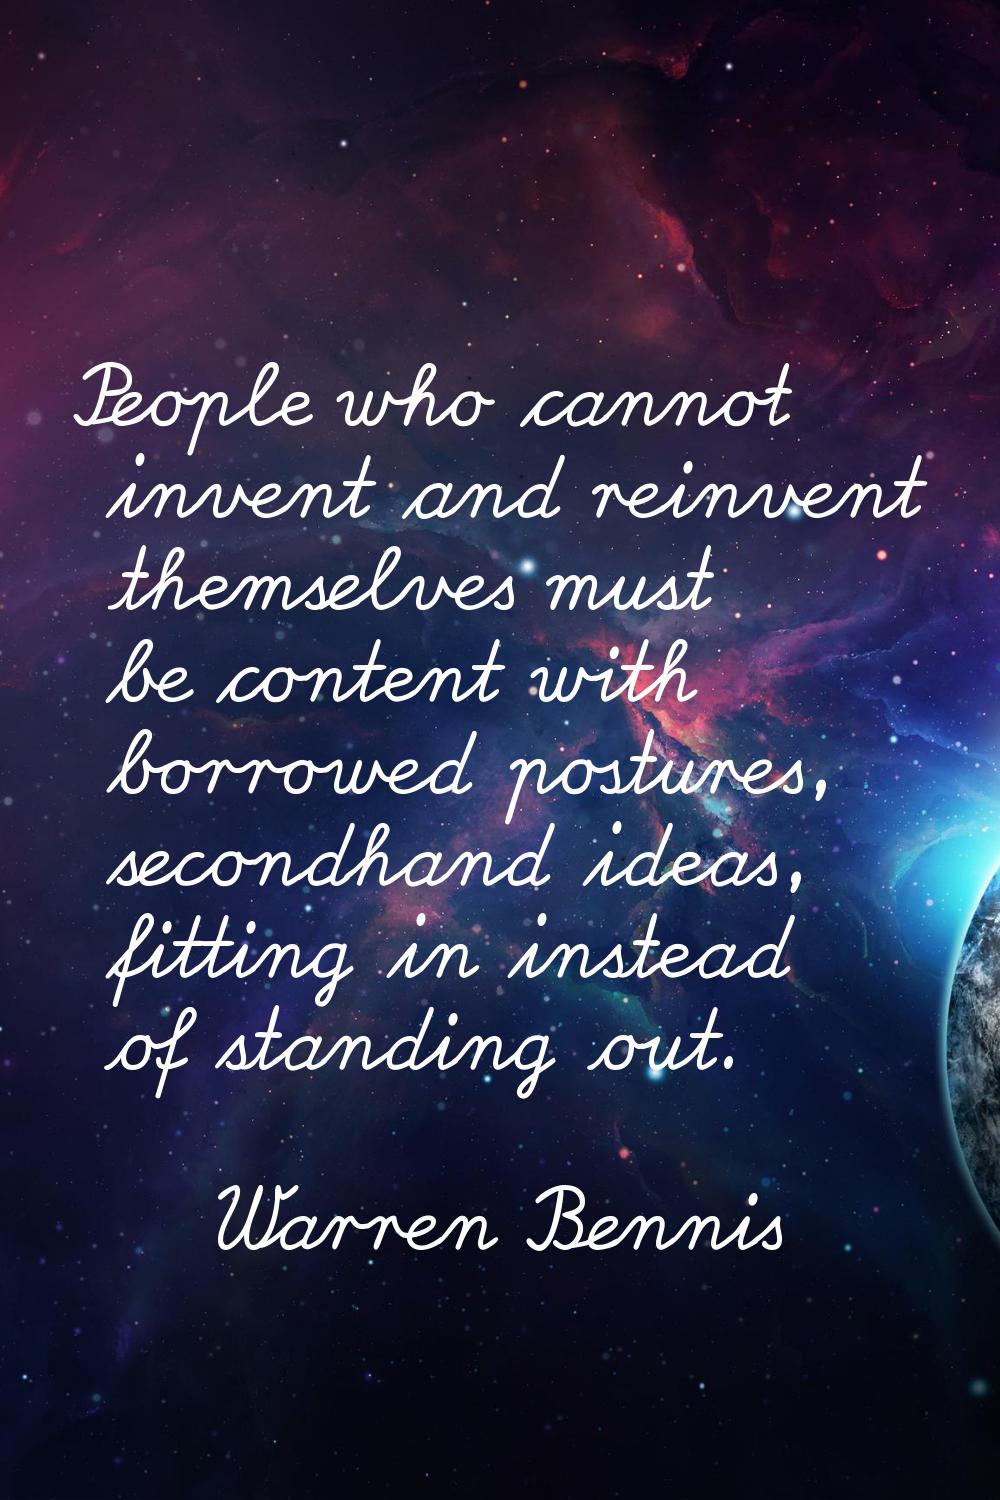 People who cannot invent and reinvent themselves must be content with borrowed postures, secondhand